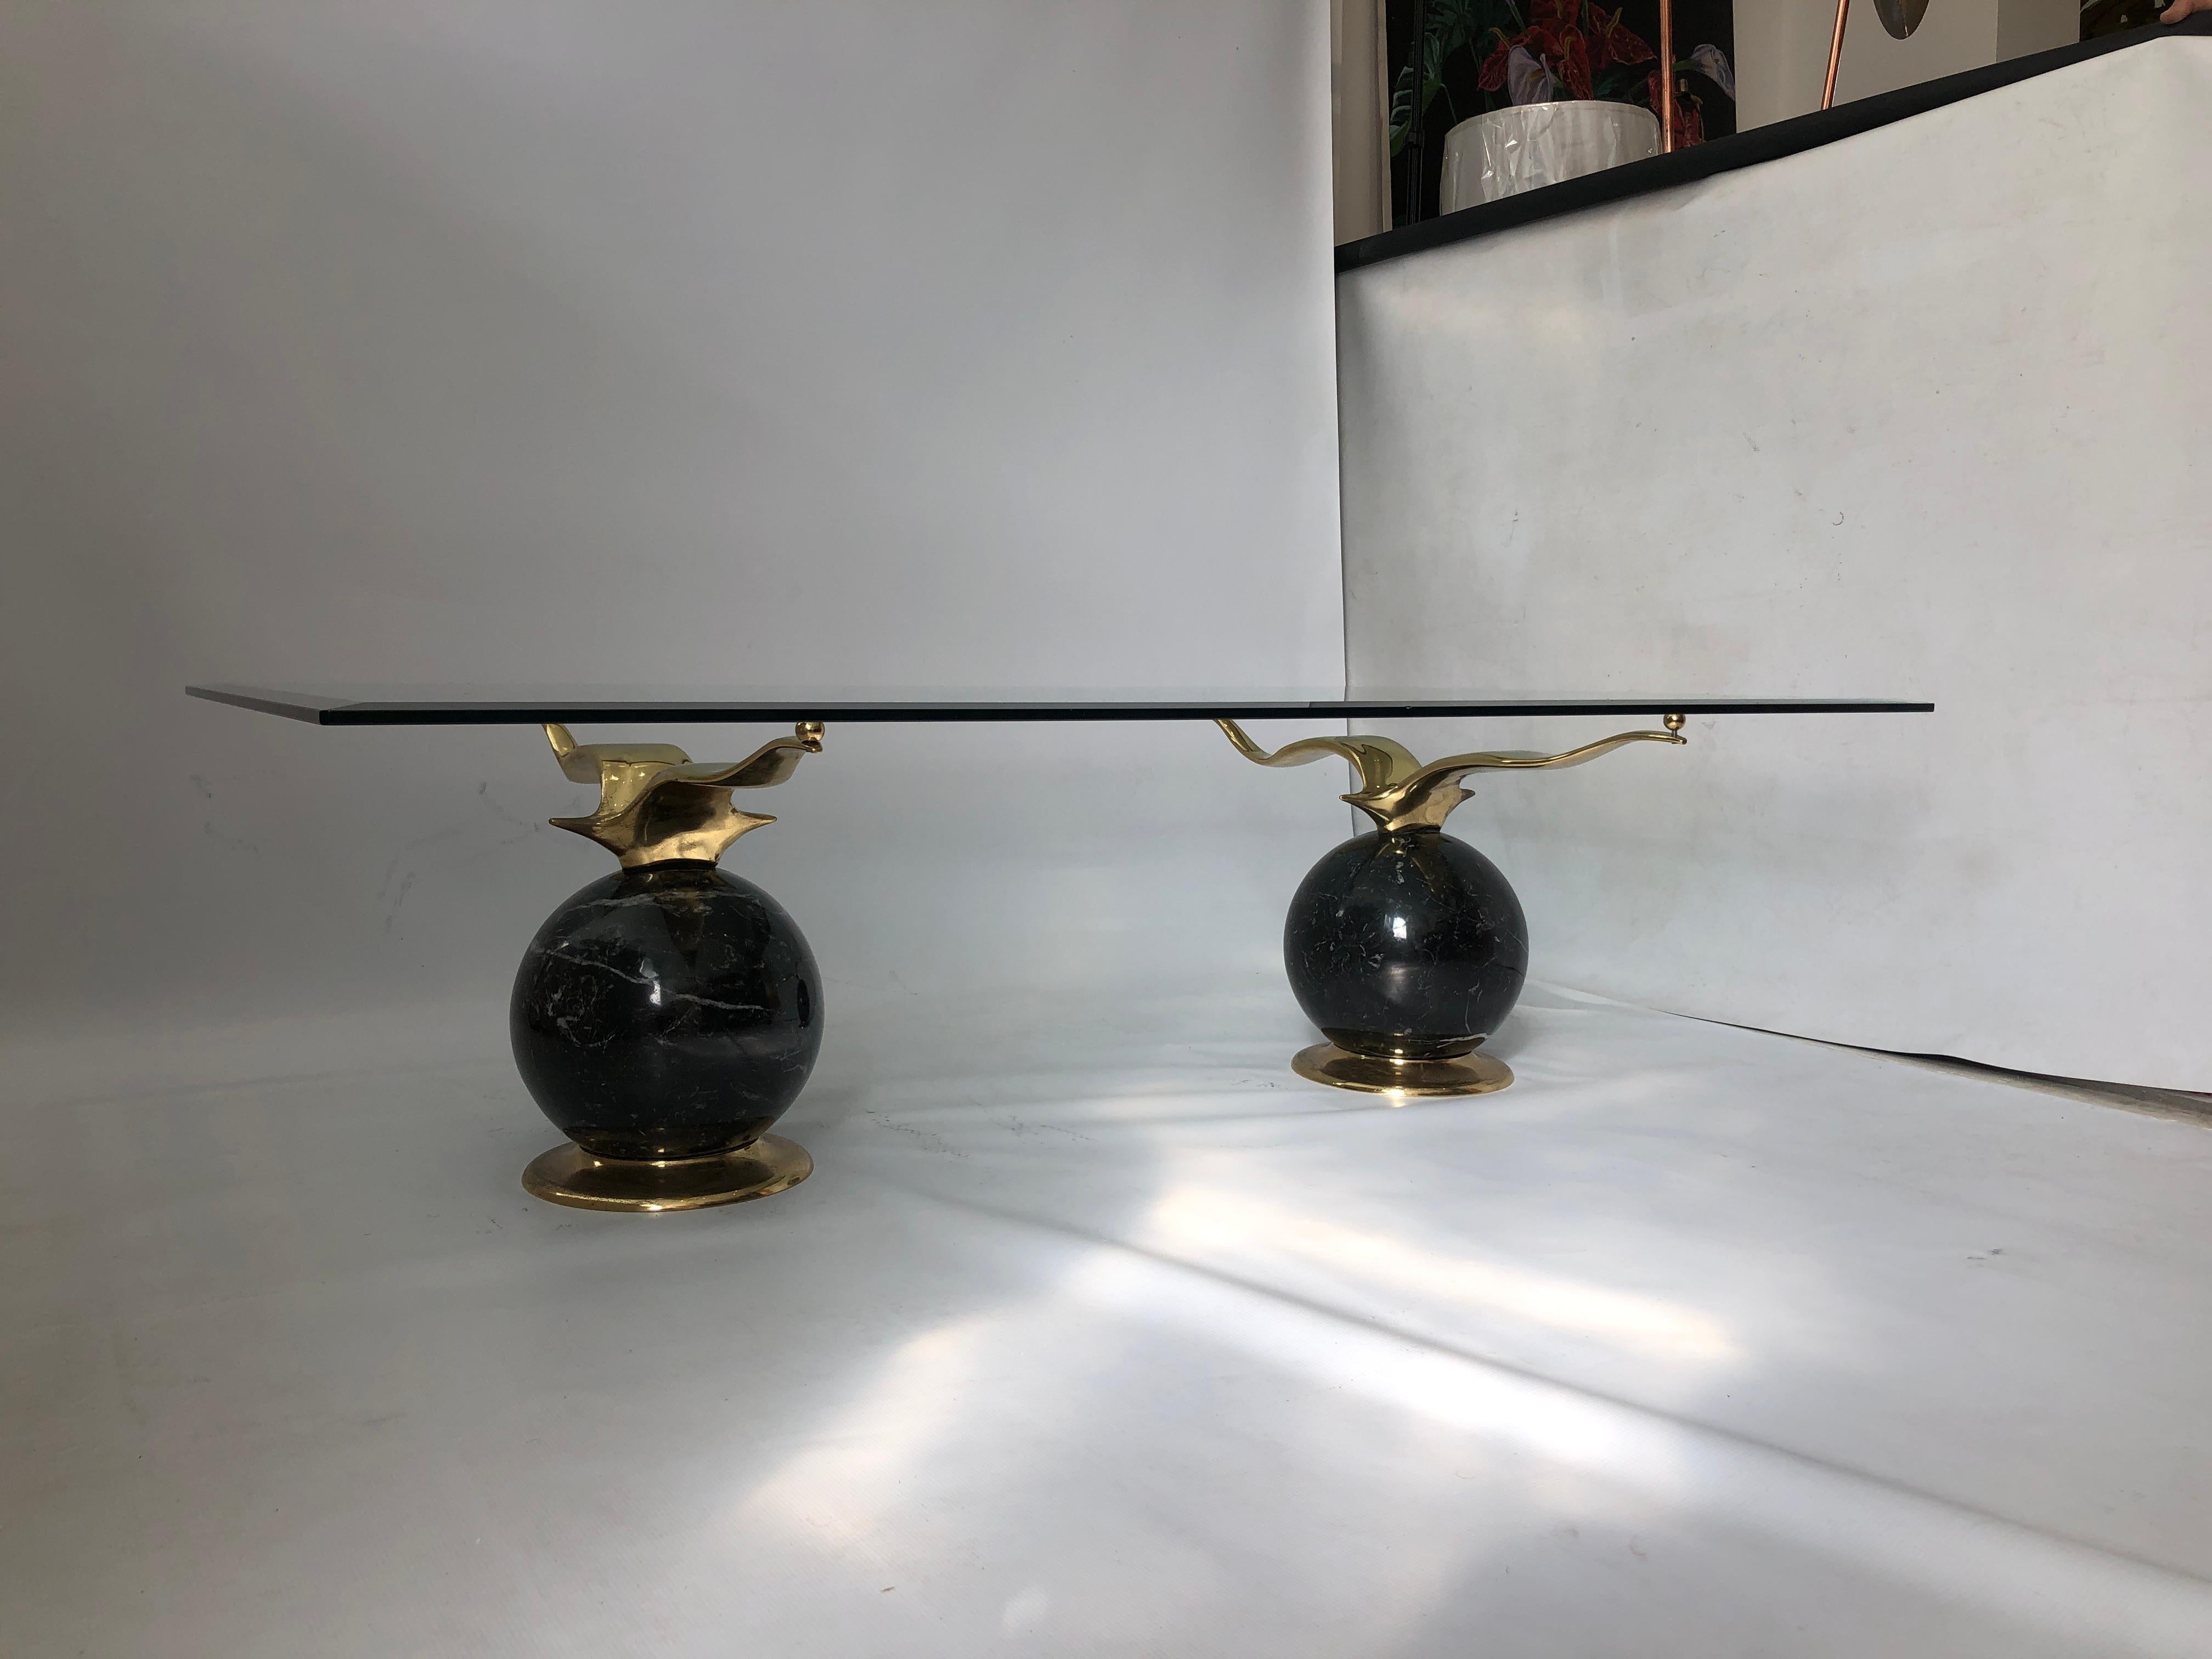 French Marble Brass Birds Glass Coffee Table 1970s Vintage Gold 1980s Hollywood Regency For Sale